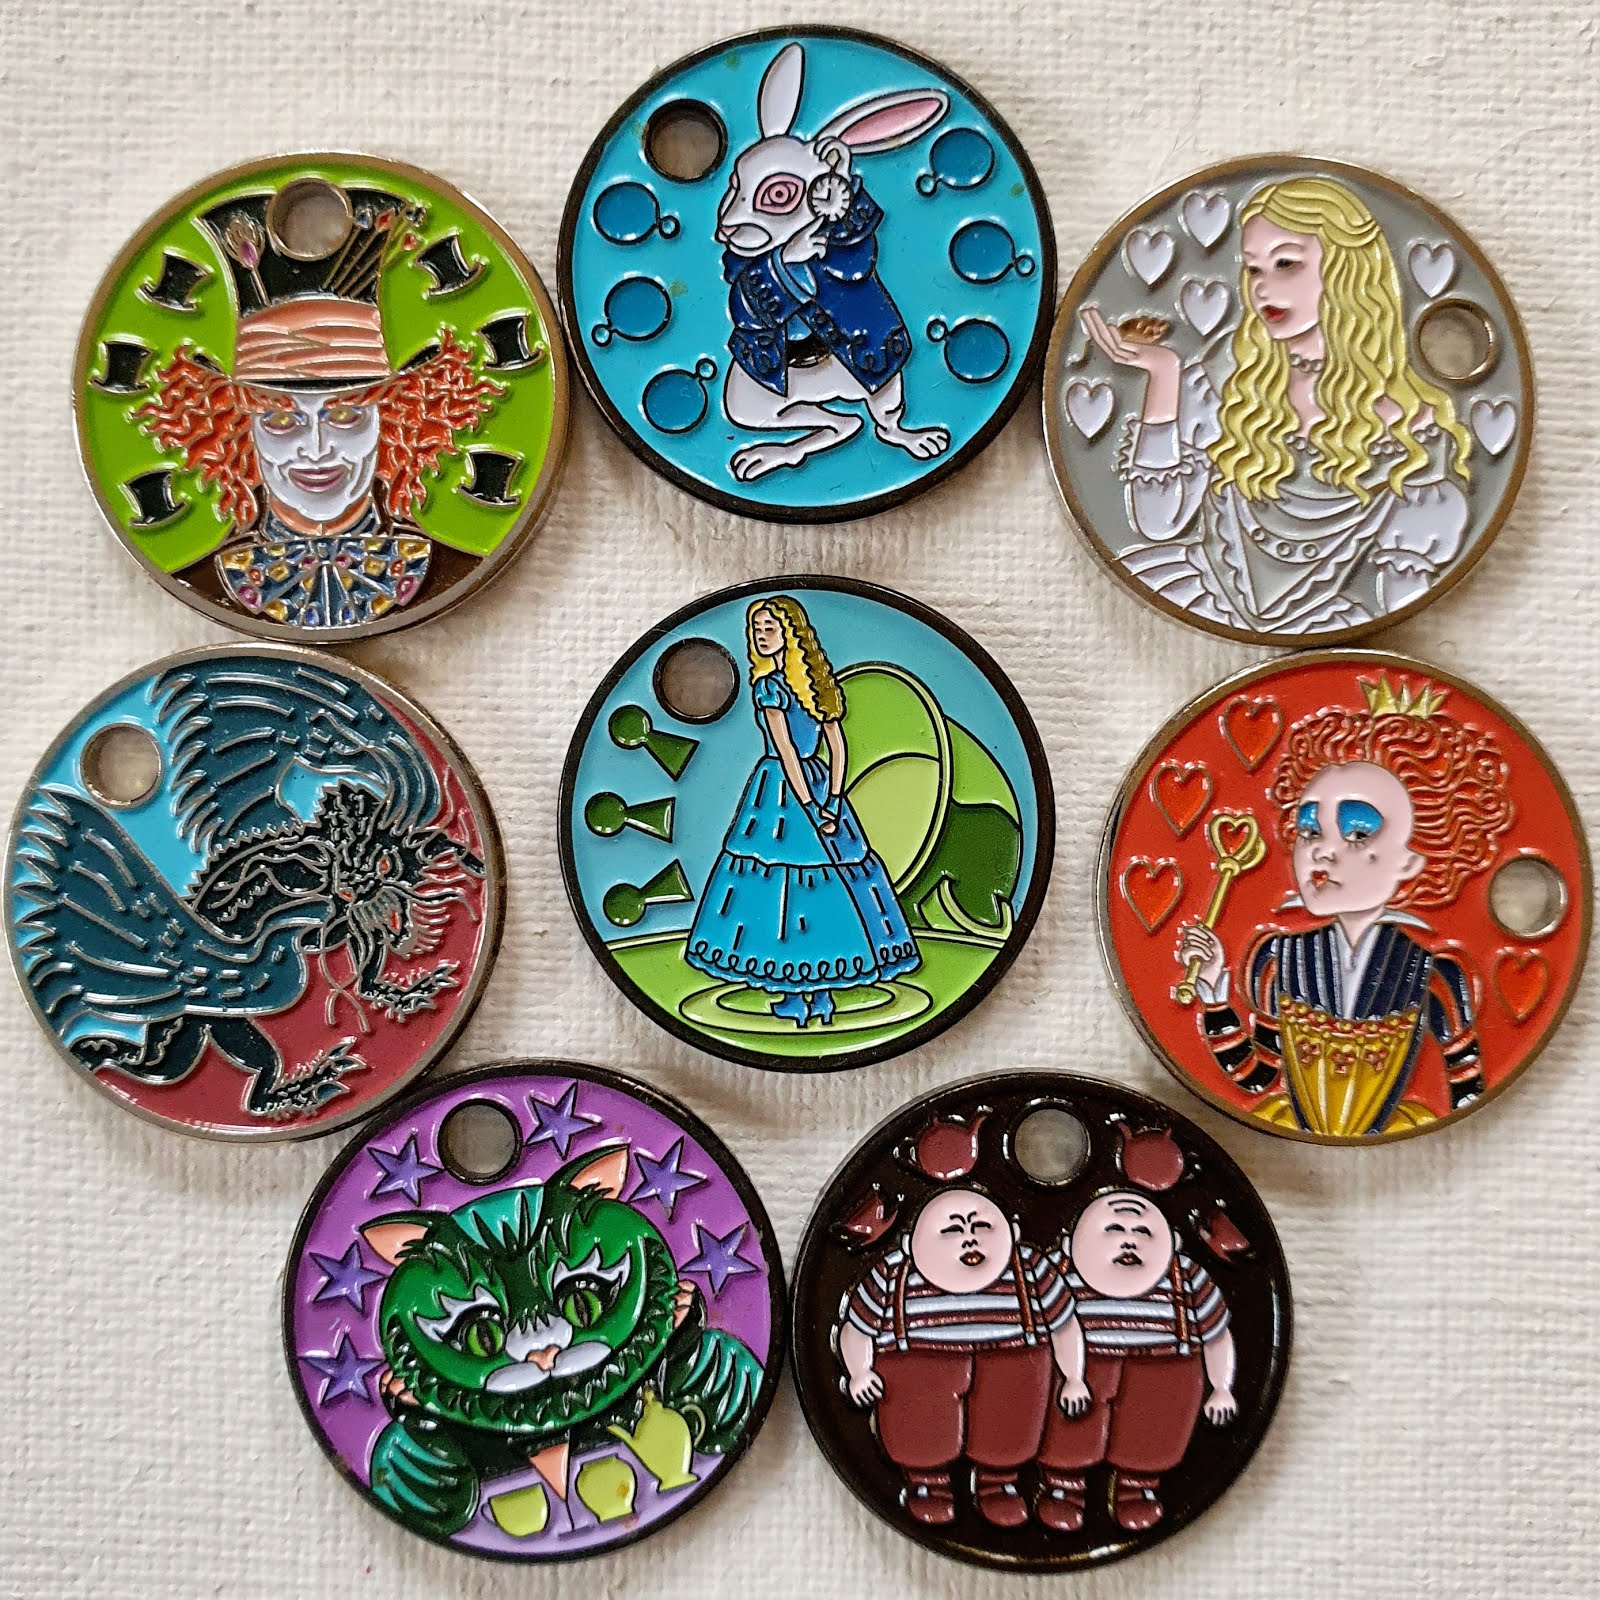 ALICE IN WONDERLAND PATHTAGS